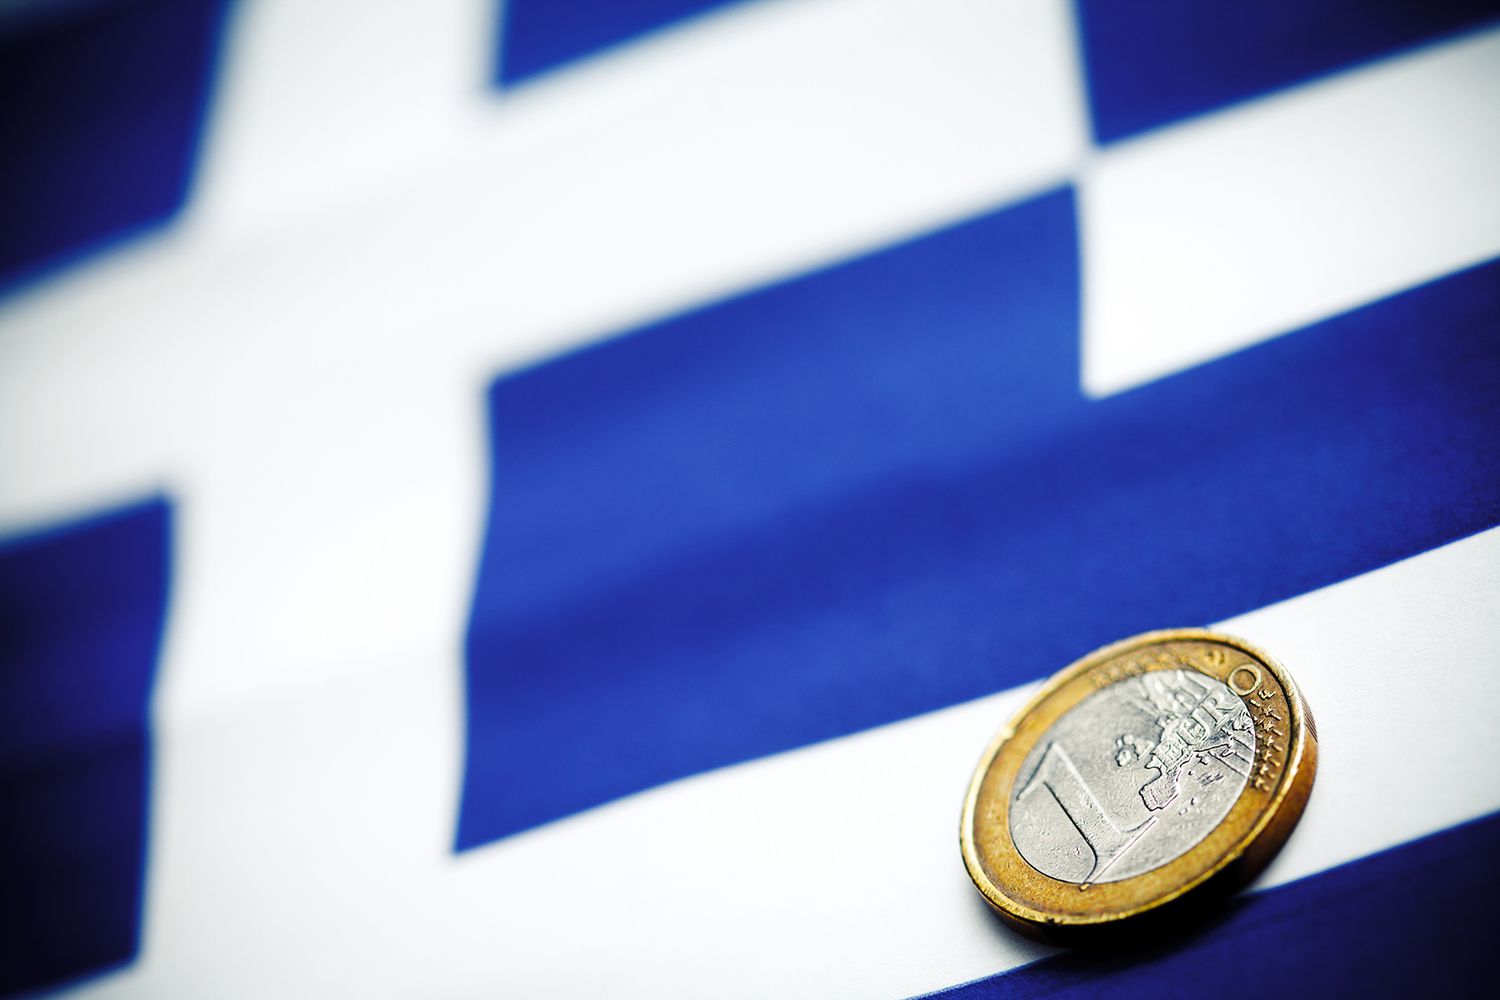 Understanding the Downfall of Greece's Economy